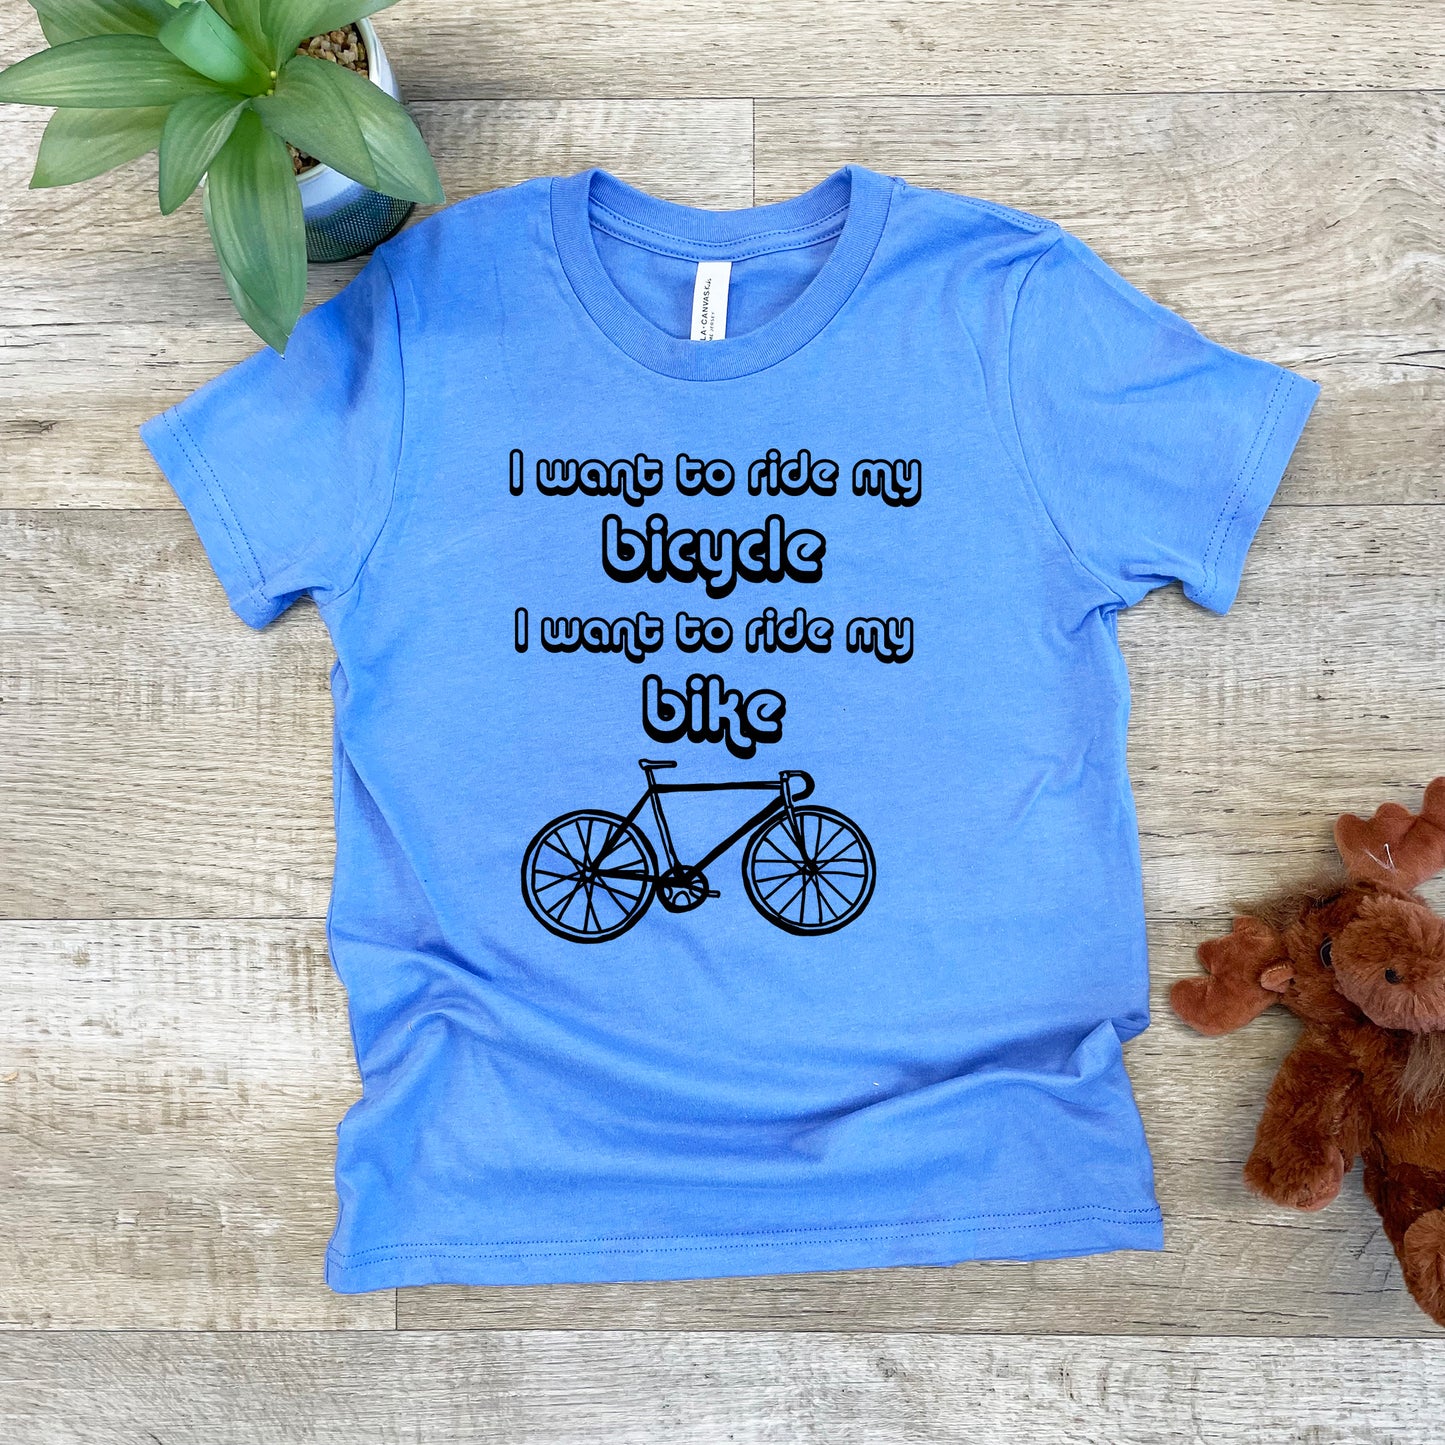 I Want To Ride My Bicycle, I Want To Ride My Bike - Kid's Tee - Columbia Blue or Lavender